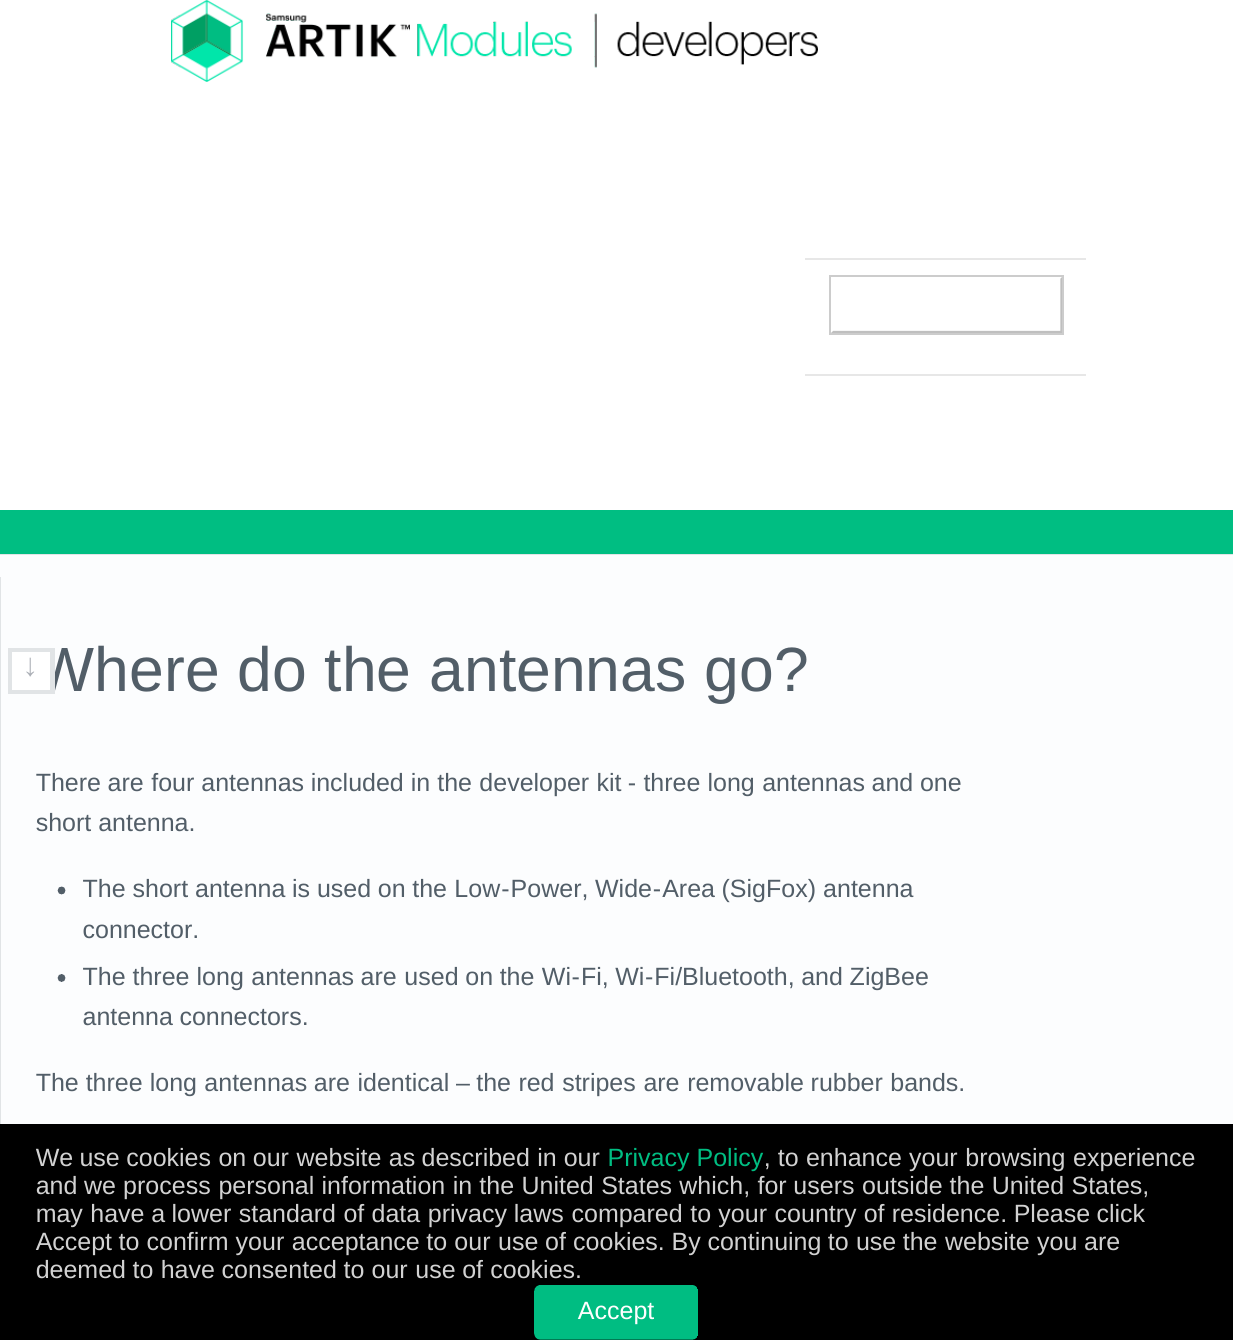 Where do the antennas go?There are four antennas included in the developer kit - three long antennas and oneshort antenna.The short antenna is used on the Low-Power, Wide-Area (SigFox) antennaconnector.The three long antennas are used on the Wi-Fi, Wi-Fi/Bluetooth, and ZigBeeantenna connectors.The three long antennas are identical – the red stripes are removable rubber bands.Here are the antenna locations for the ARTIK 5, Ver. 0.5 developer board:↓We use cookies on our website as described in our Privacy Policy, to enhance your browsing experienceand we process personal information in the United States which, for users outside the United States,may have a lower standard of data privacy laws compared to your country of residence. Please clickAccept to confirm your acceptance to our use of cookies. By continuing to use the website you aredeemed to have consented to our use of cookies.Accept        